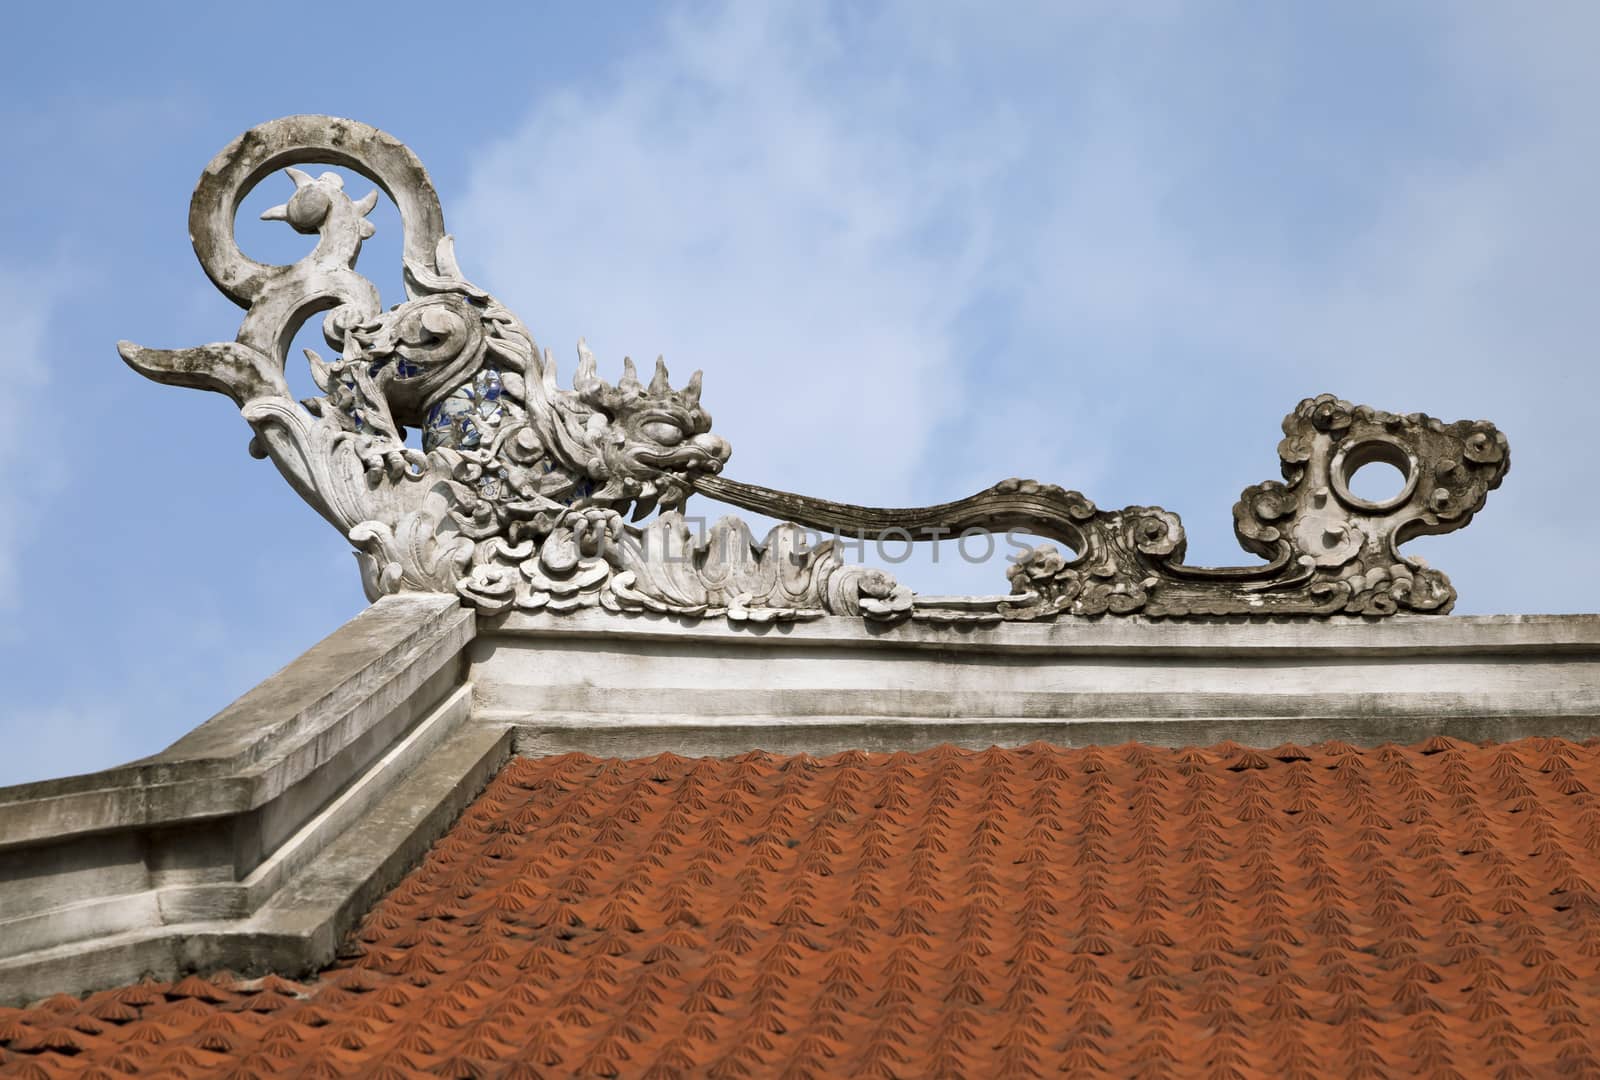 Decoration on a temple roof in Vietnam by Goodday